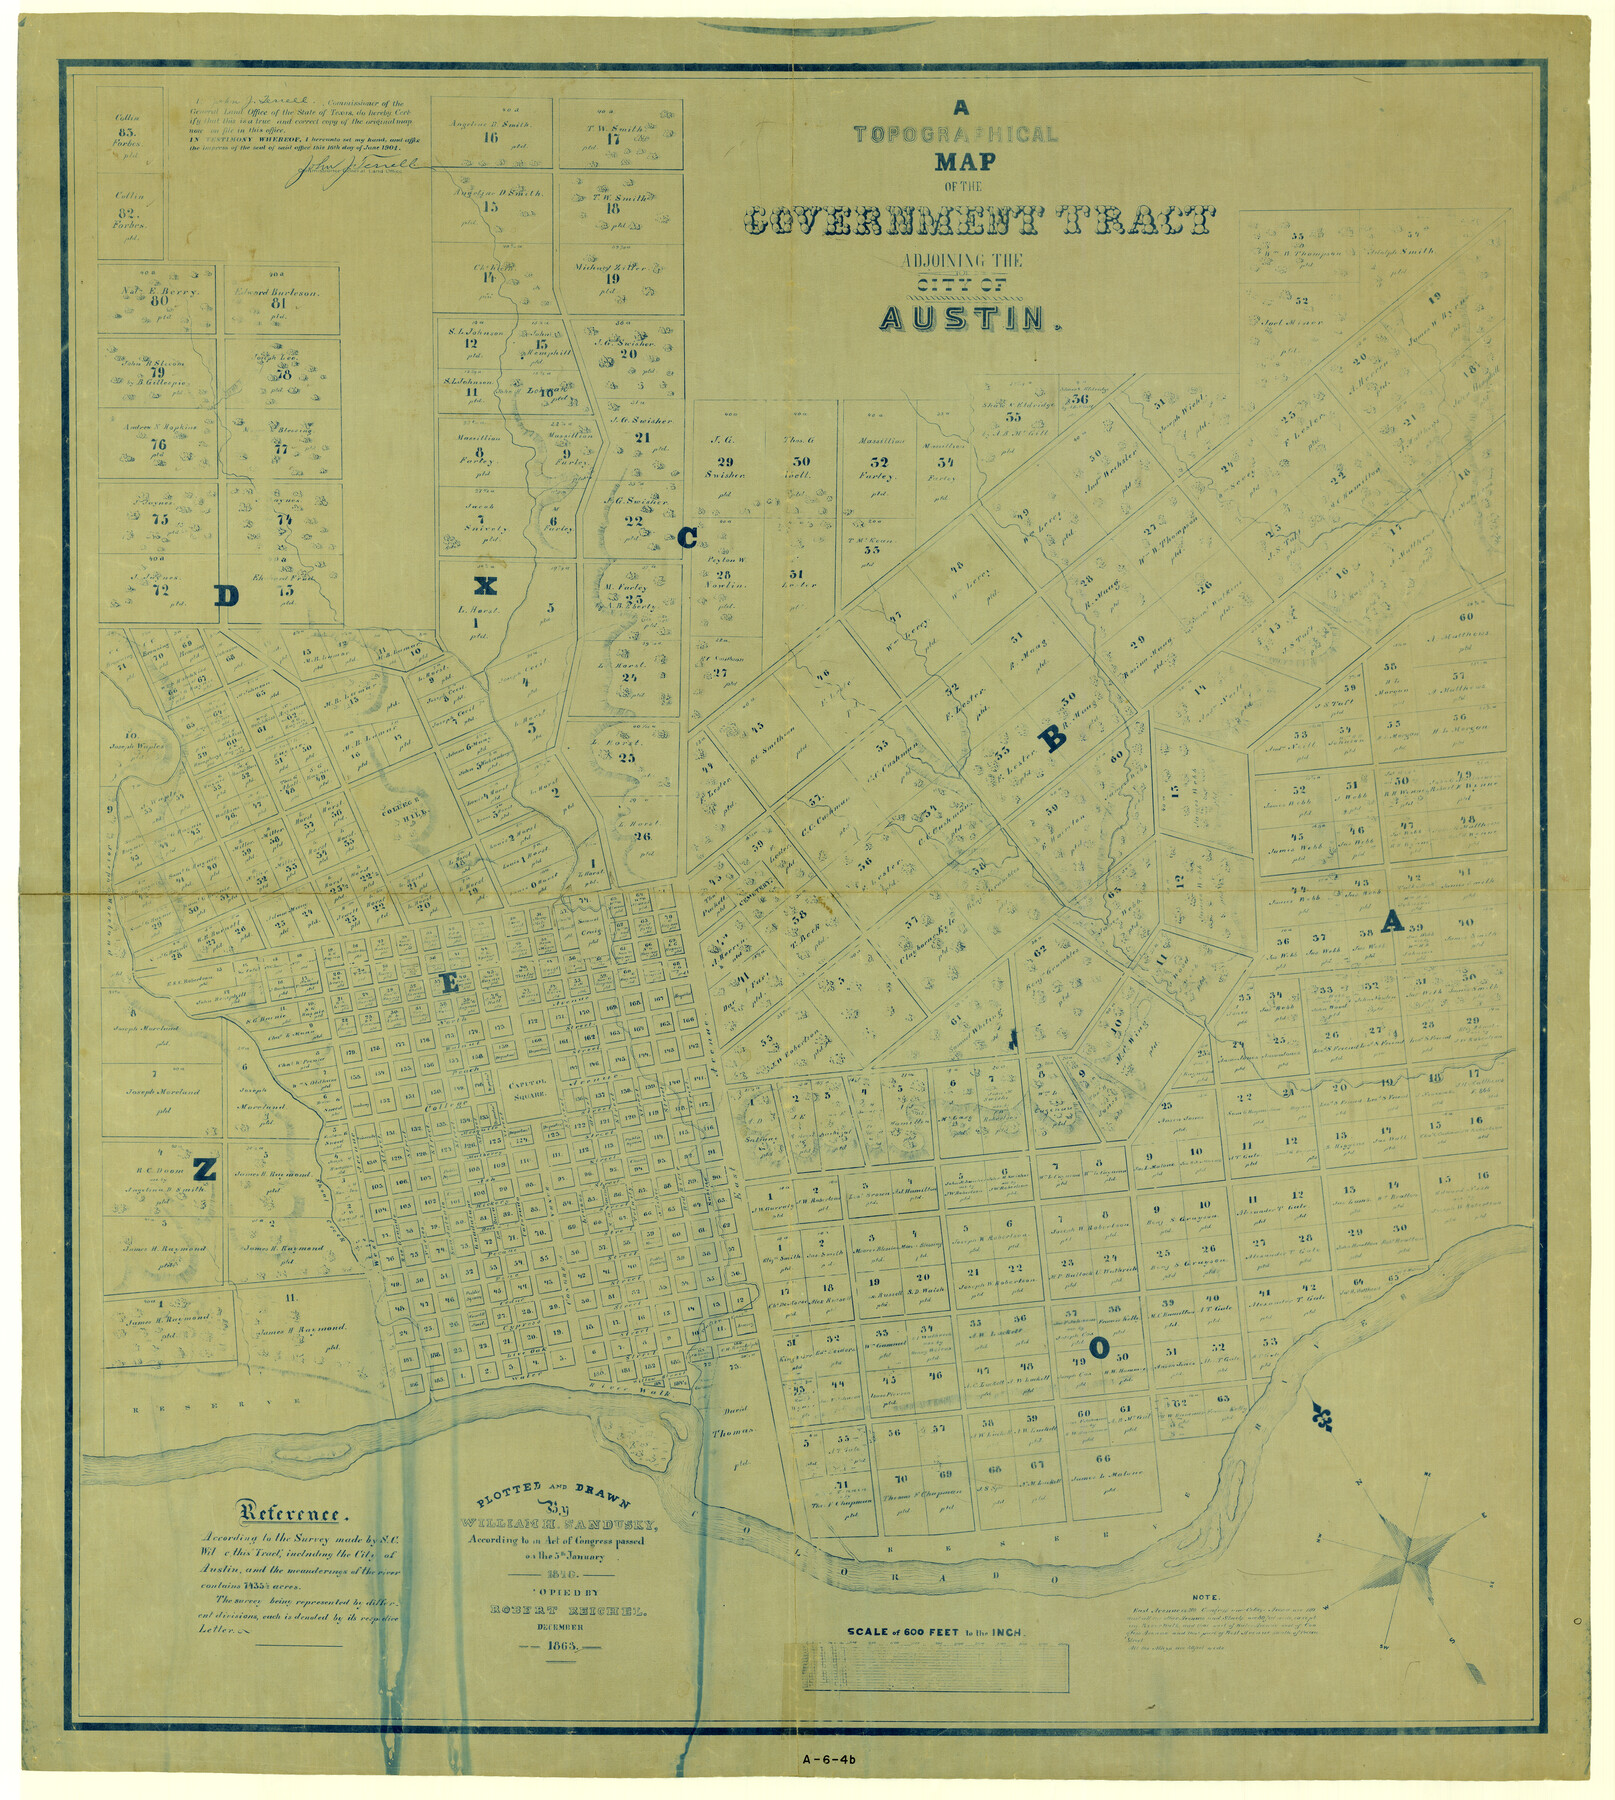 4833, A Topographical Map of the Government Tract Adjoining the City of Austin, General Map Collection